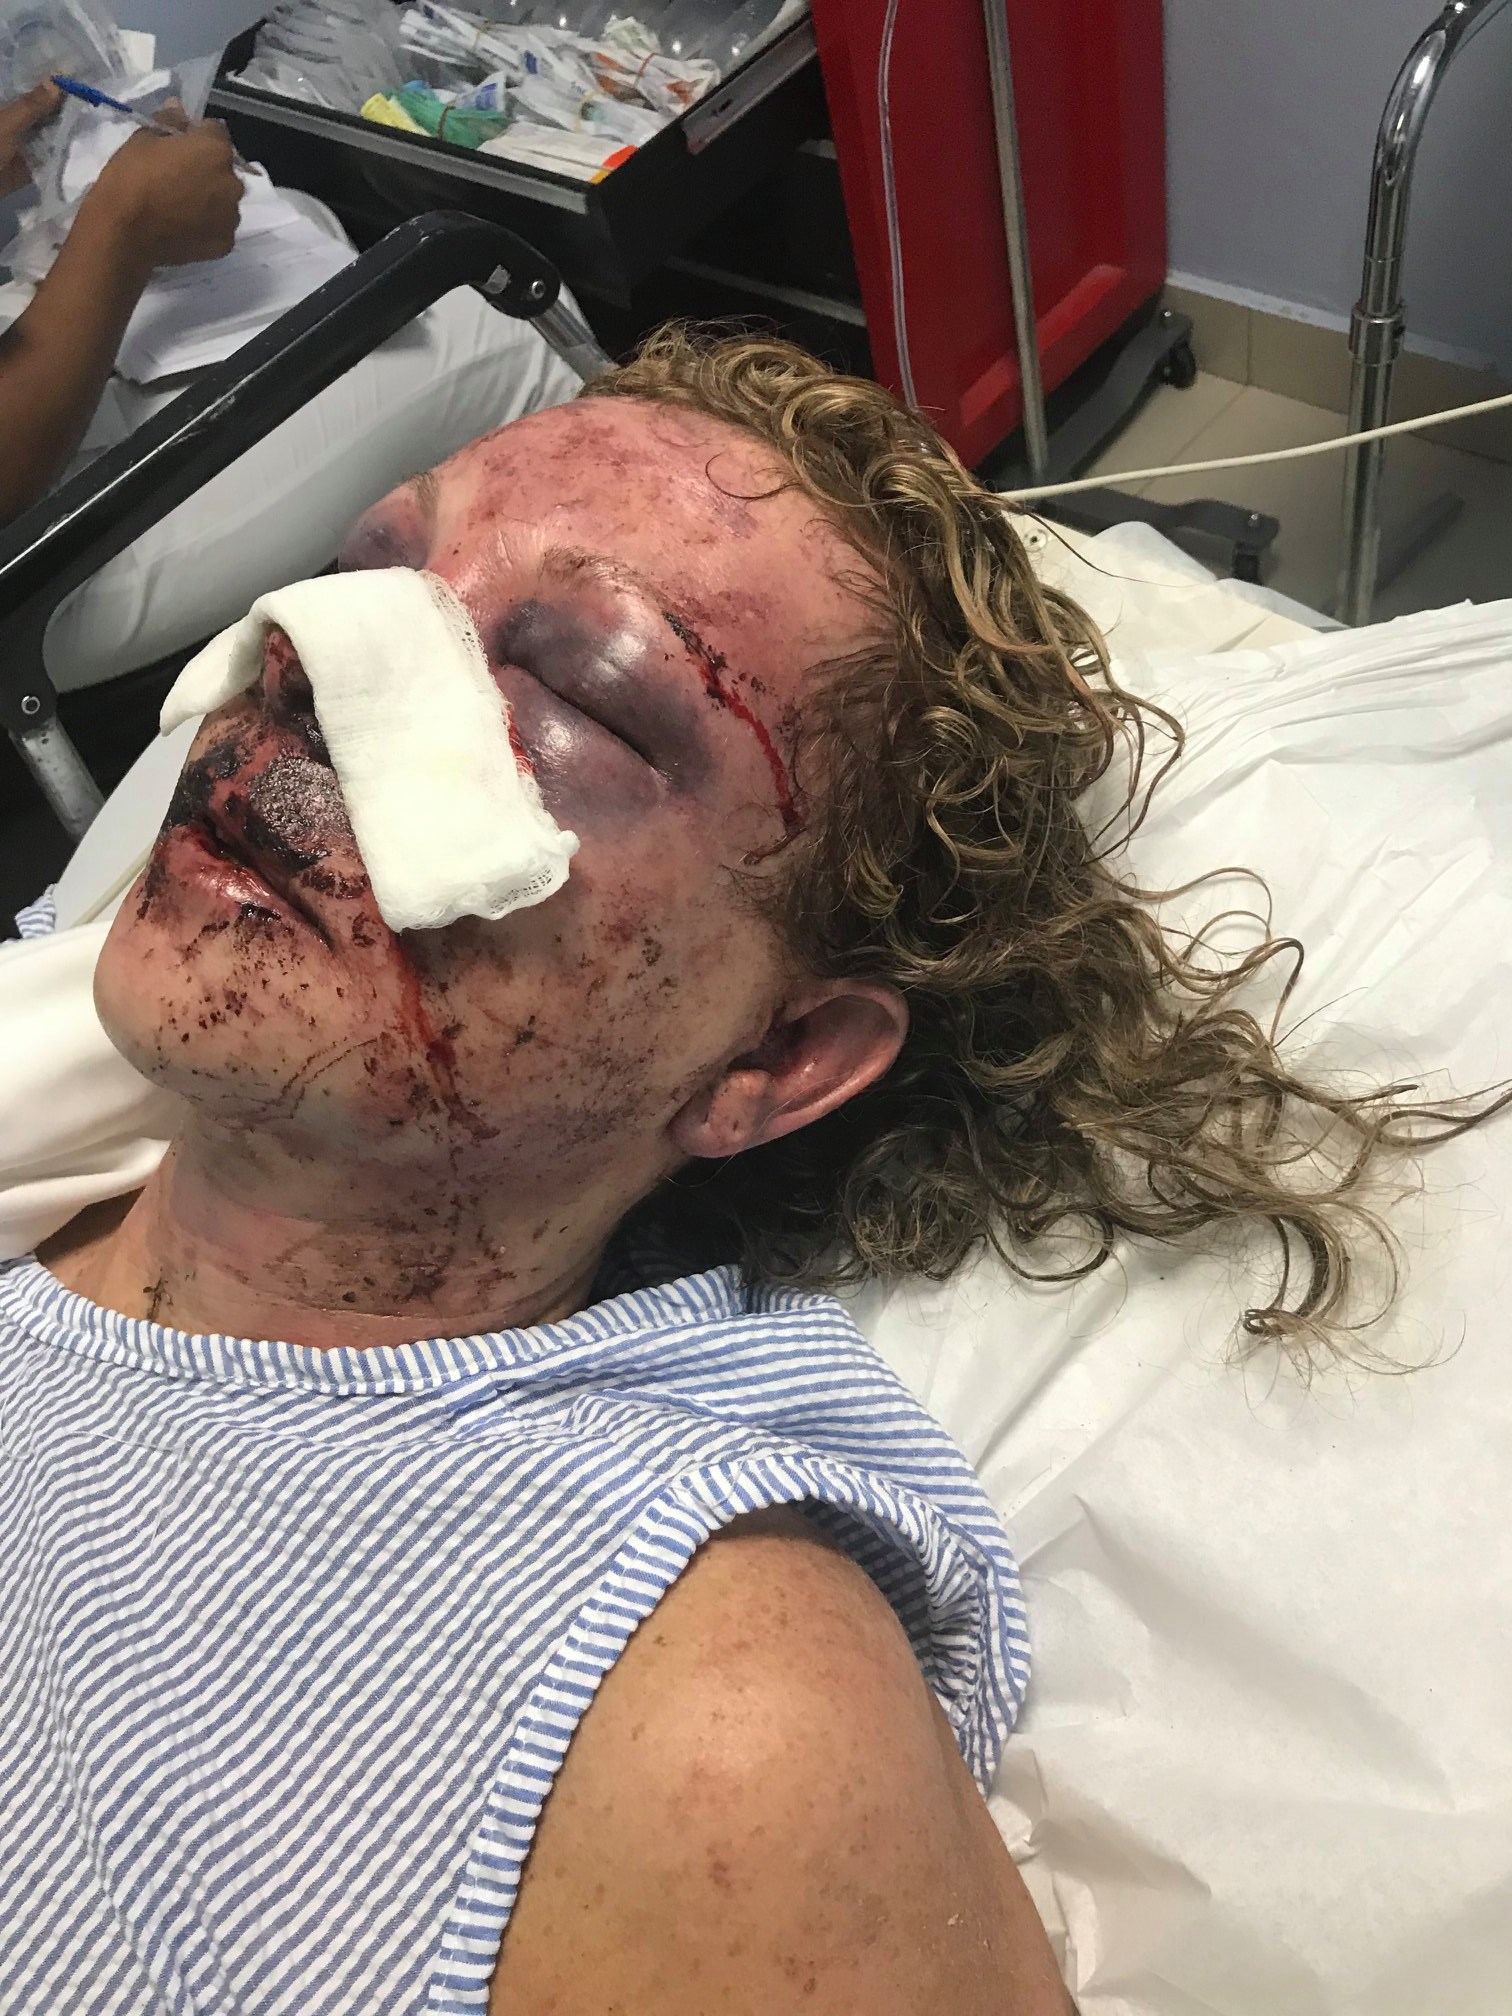 PHOTO: Tammy Lawrence-Daley said she endured a brutal attack while on vacation in the Dominican Republic.